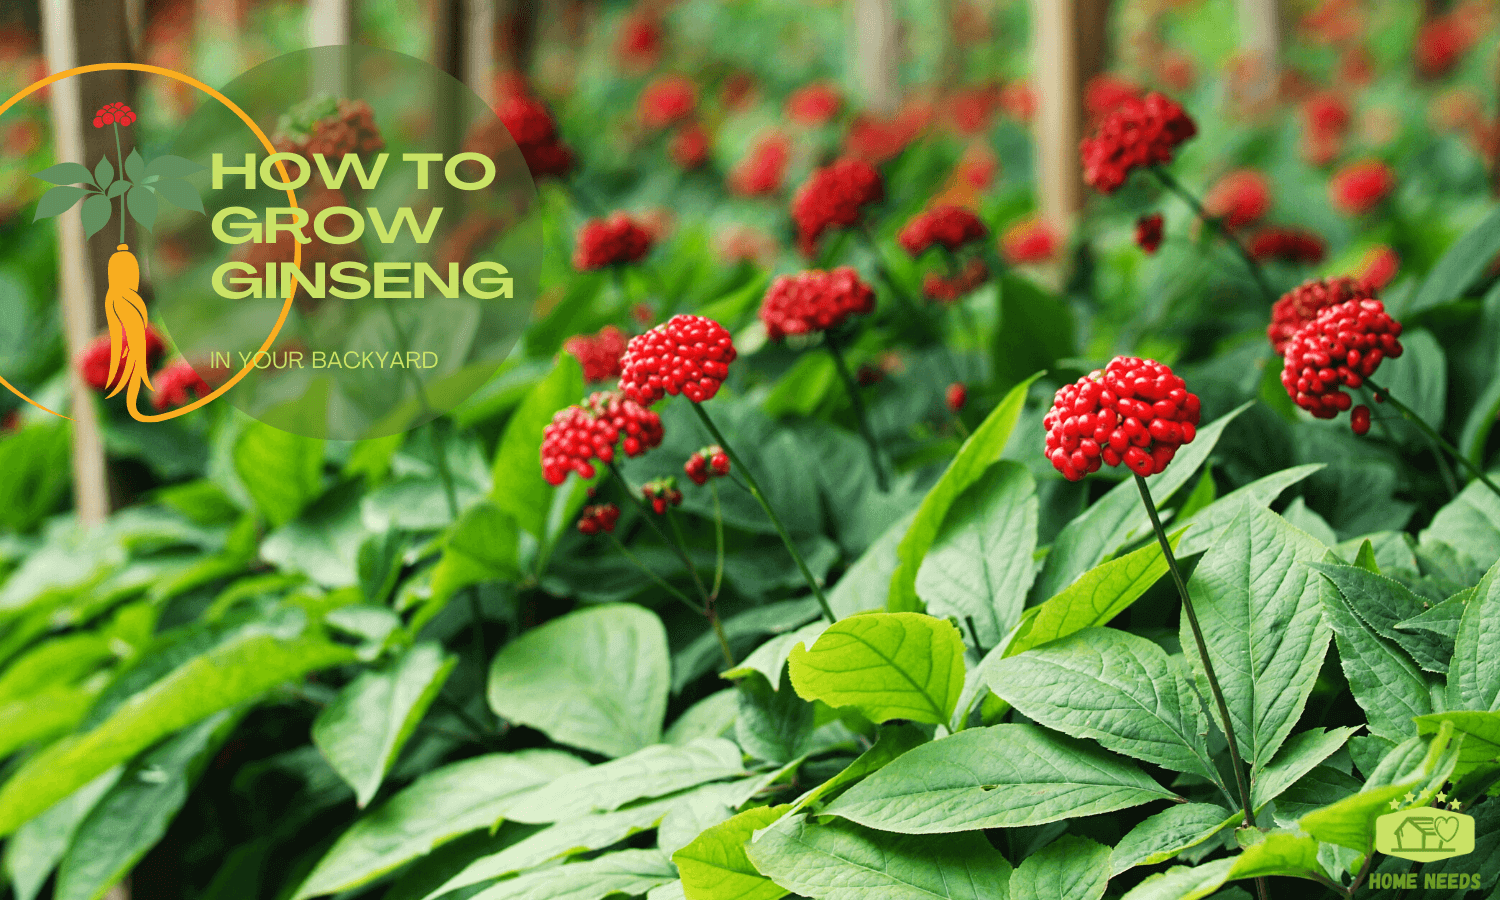 HOW TO GROW GINSENG IN YOUR BACKYARD